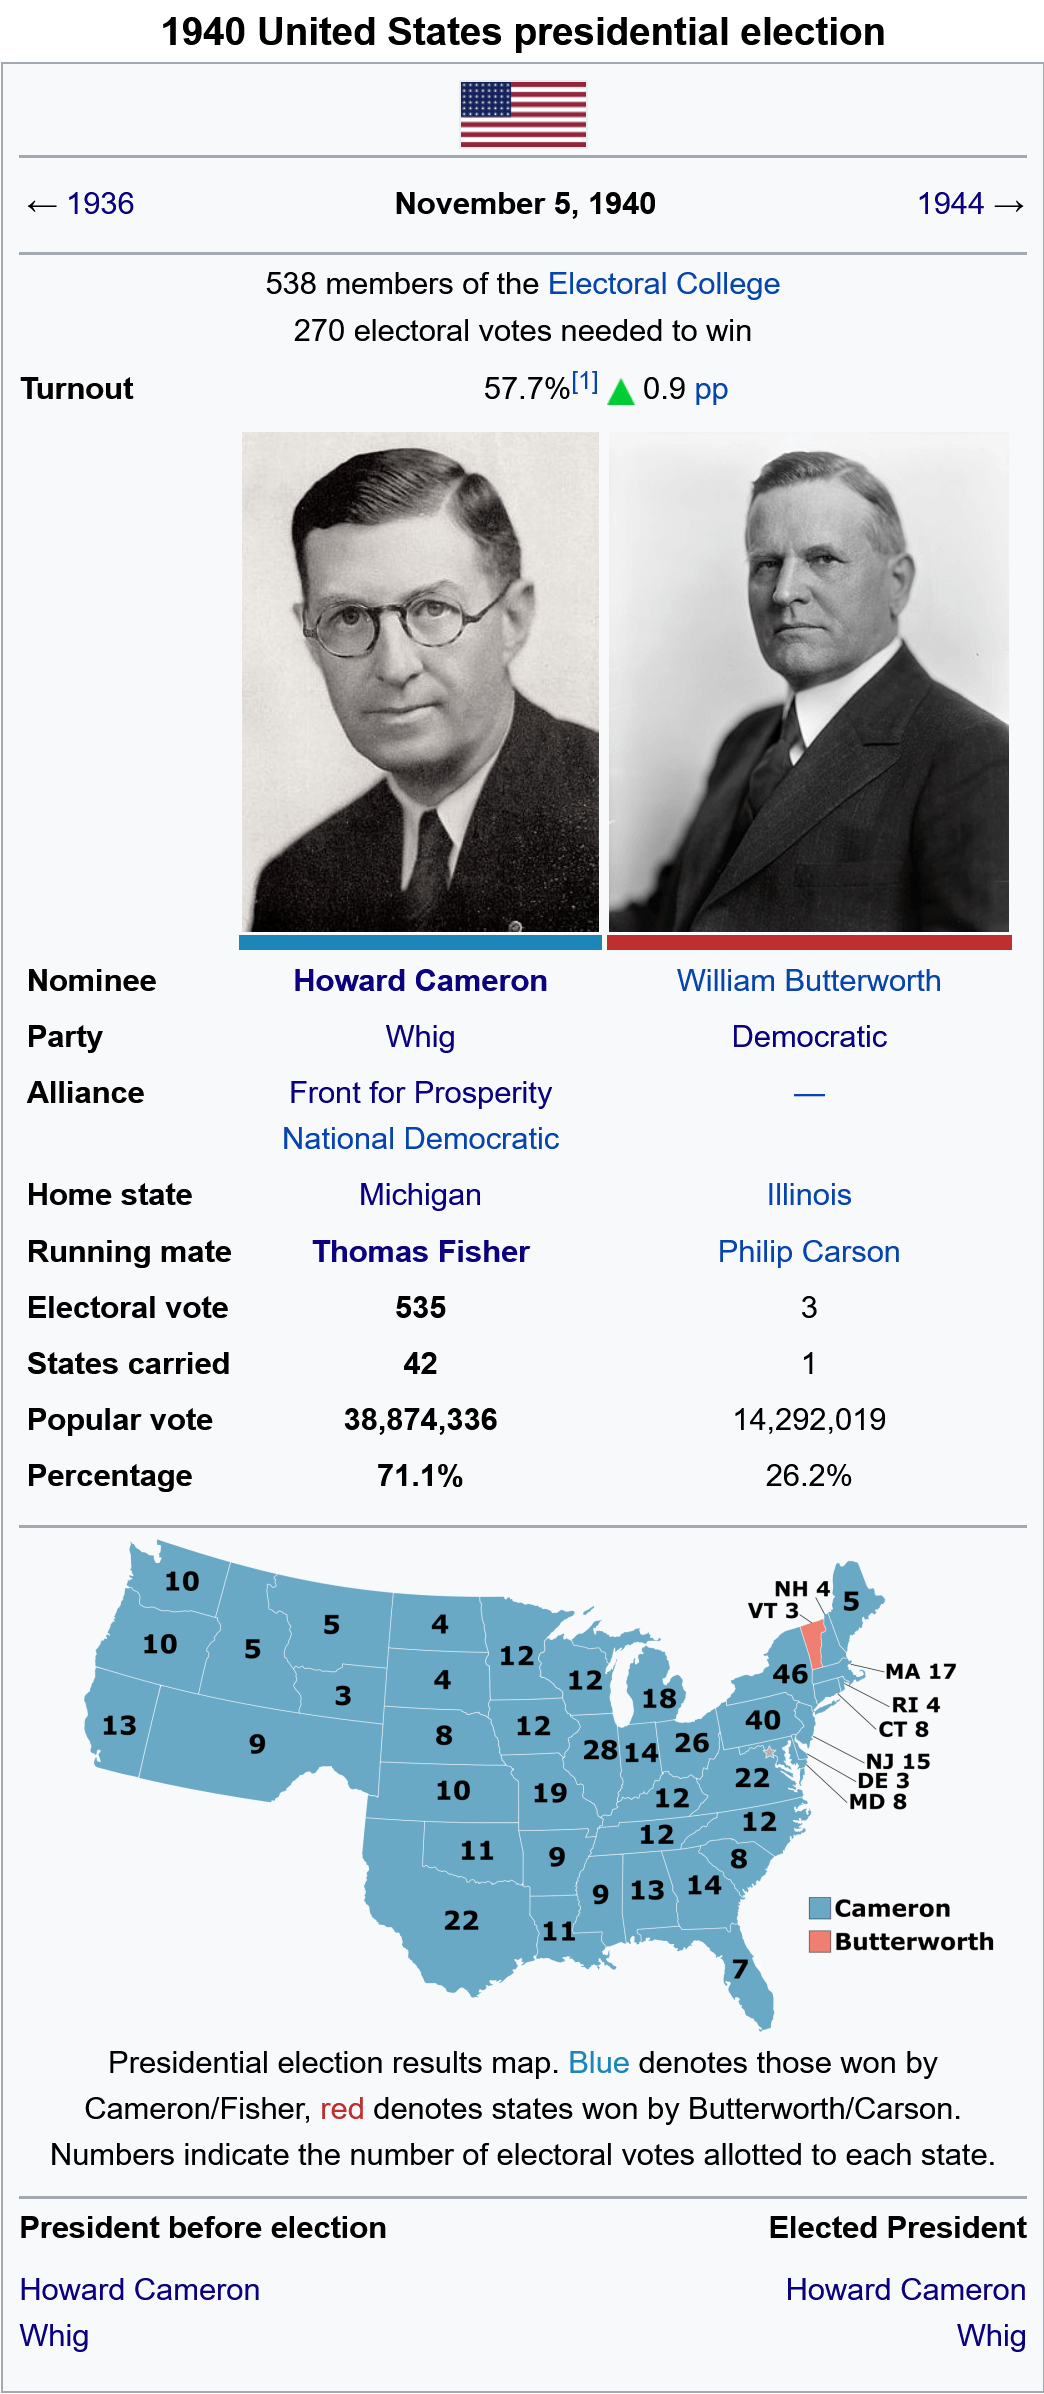 The American System 1940 presidential wikibox(1).png